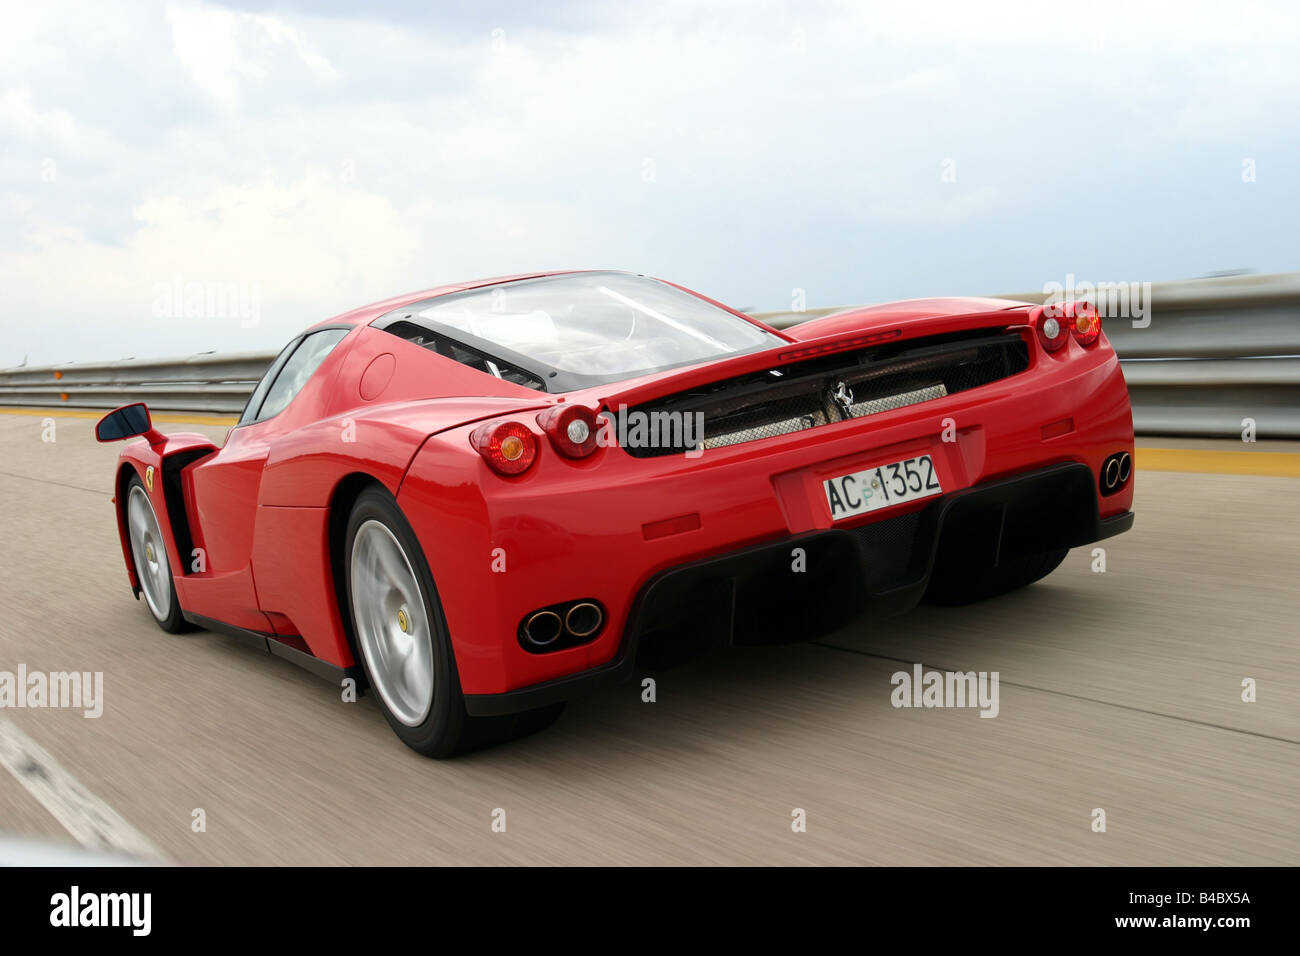 Car, Ferrari Enzo Ferrari, roadster, model year 2002-, Coupe/coupe, red, driving, diagonal from the back, rear view, test track, Stock Photo